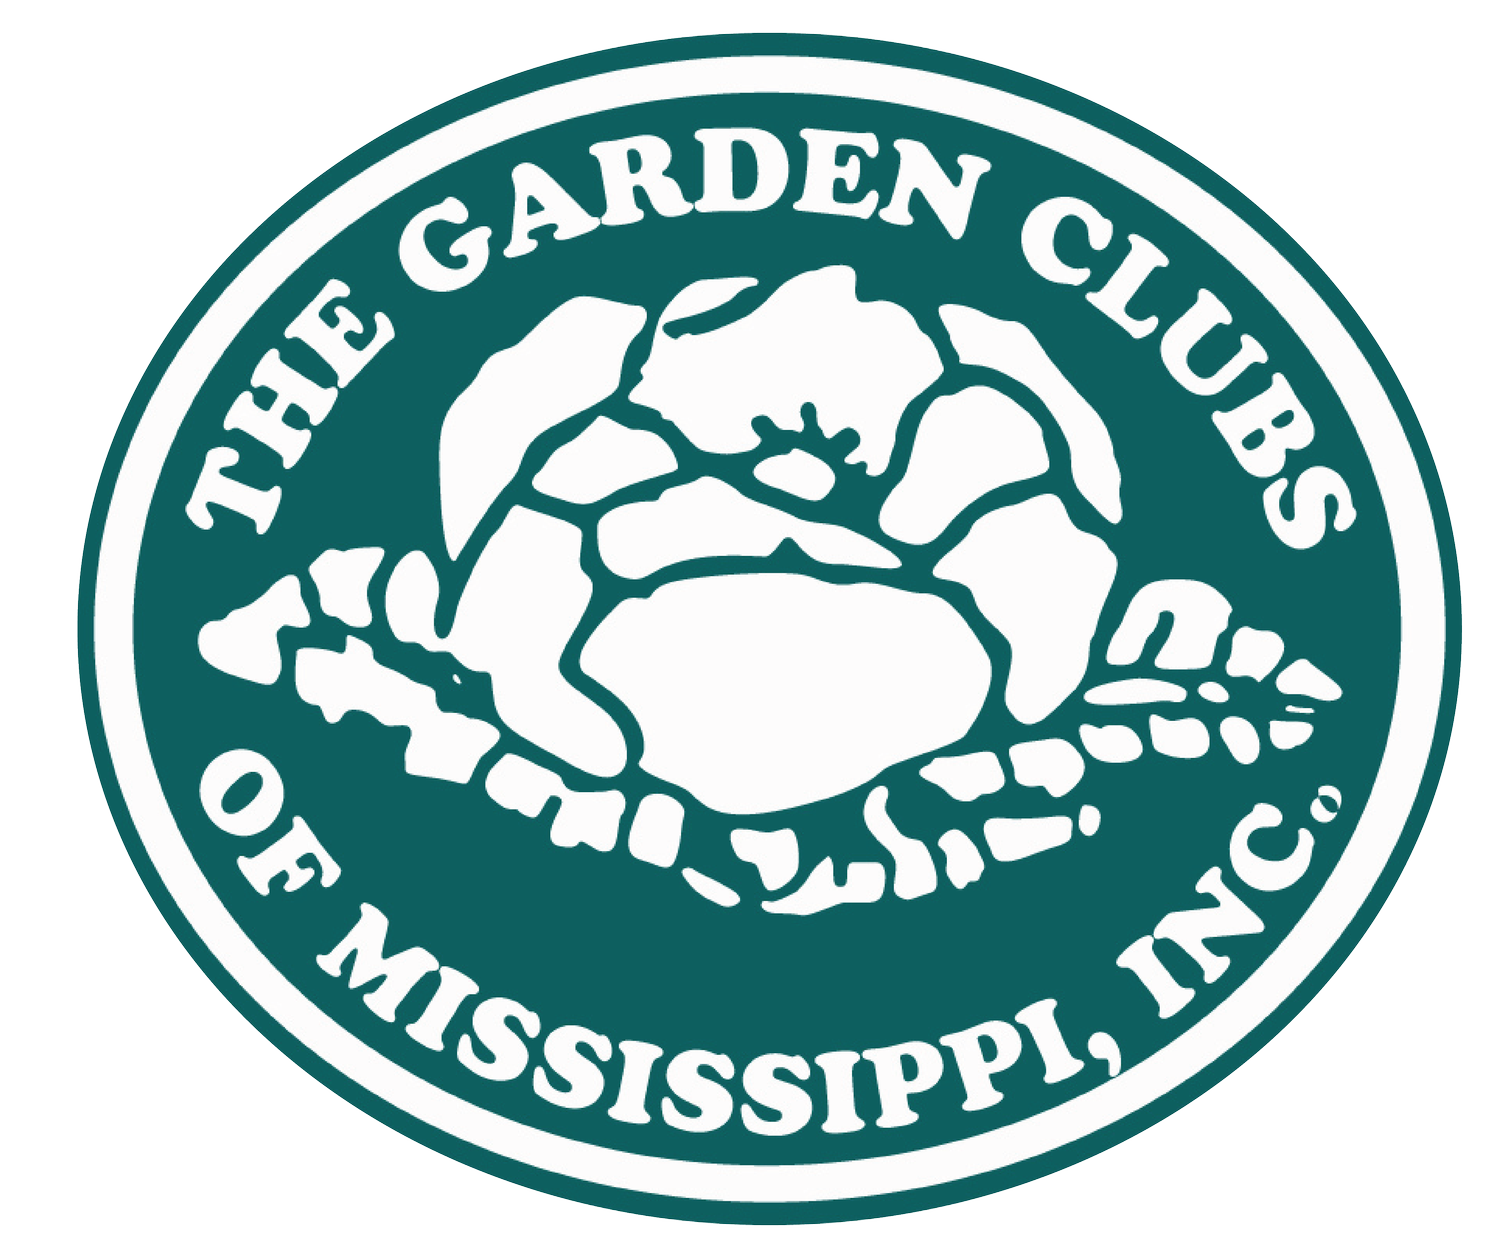 The Garden Clubs of Mississippi, Inc.